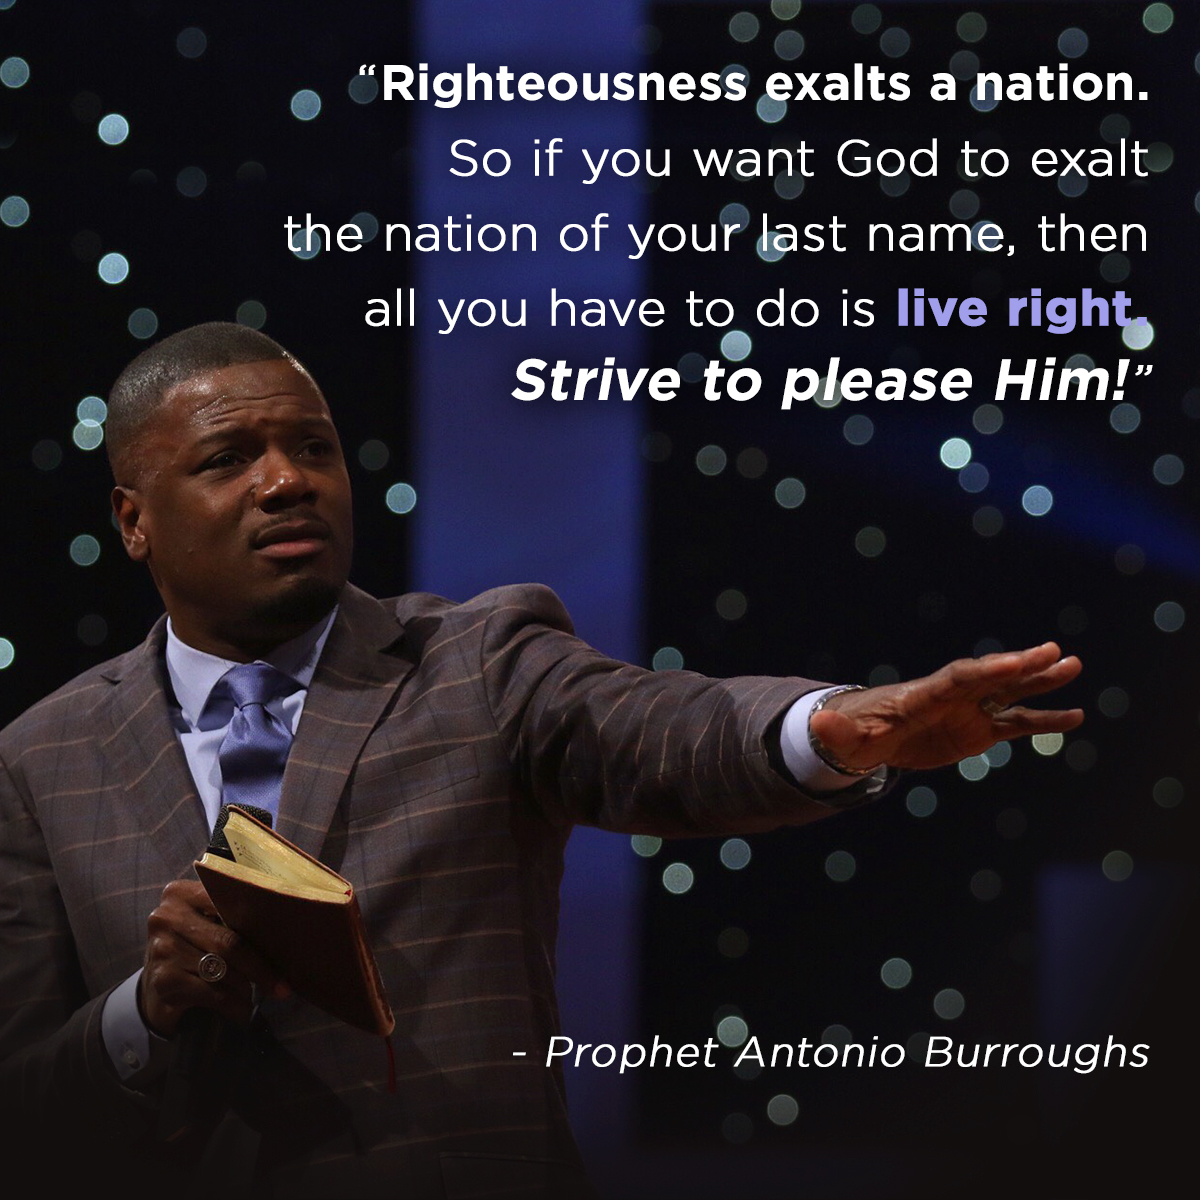 “Righteousness exalts a nation. So if you want God to exalt the nation of your last name, then all you have to do is live right. Strive to please Him!” – Prophet Antonio Burroughs